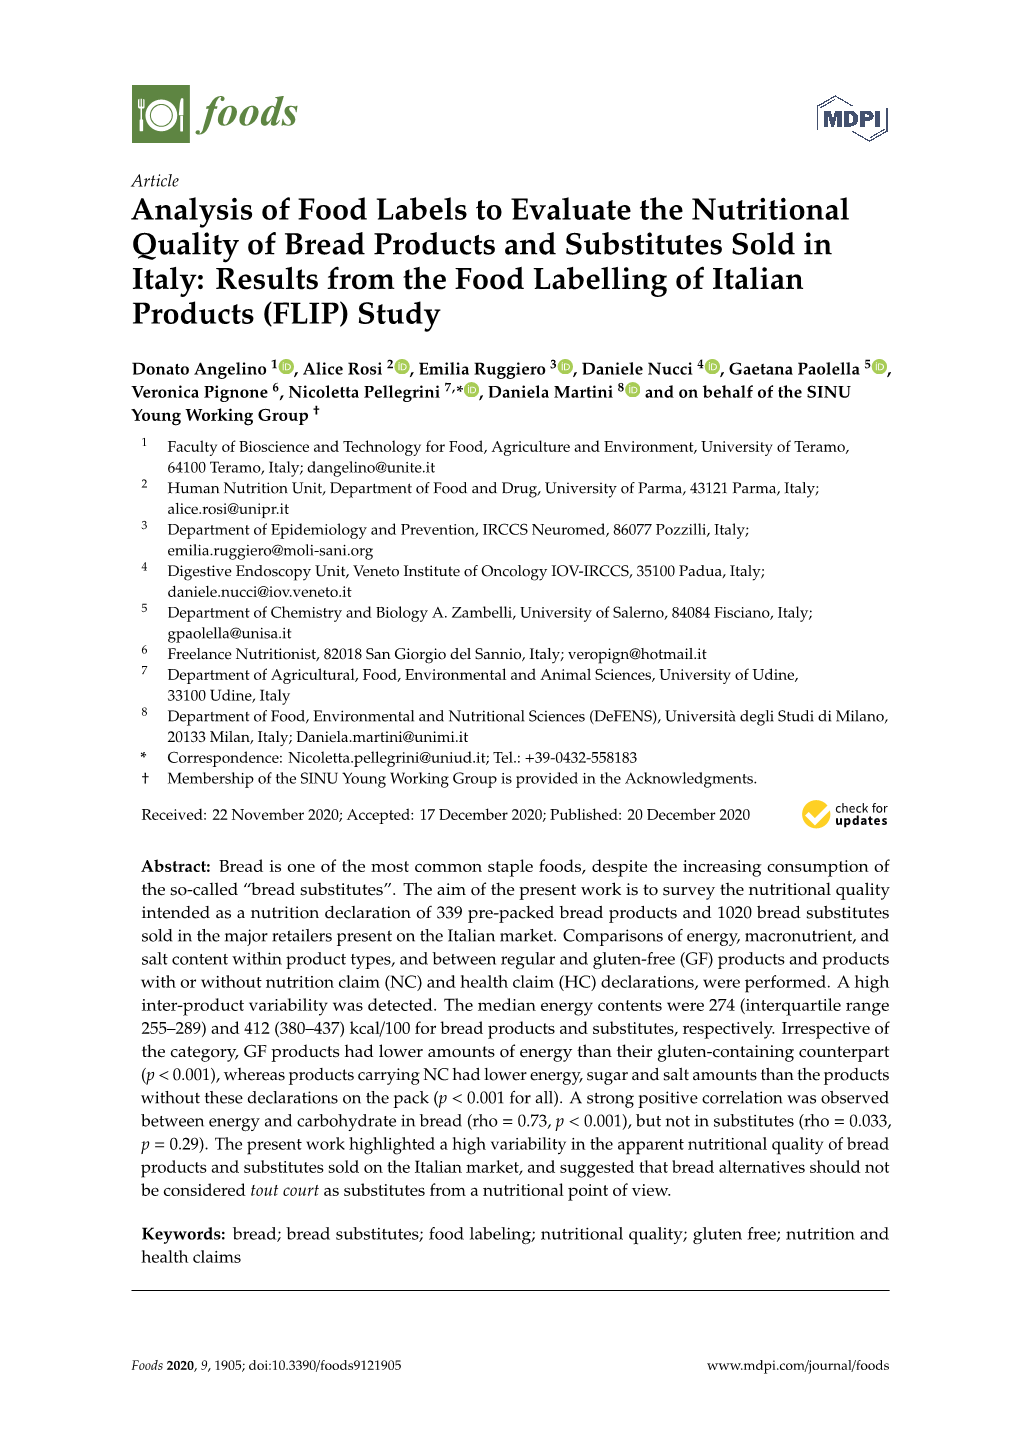 Analysis of Food Labels to Evaluate the Nutritional Quality of Bread Products and Substitutes Sold in Italy